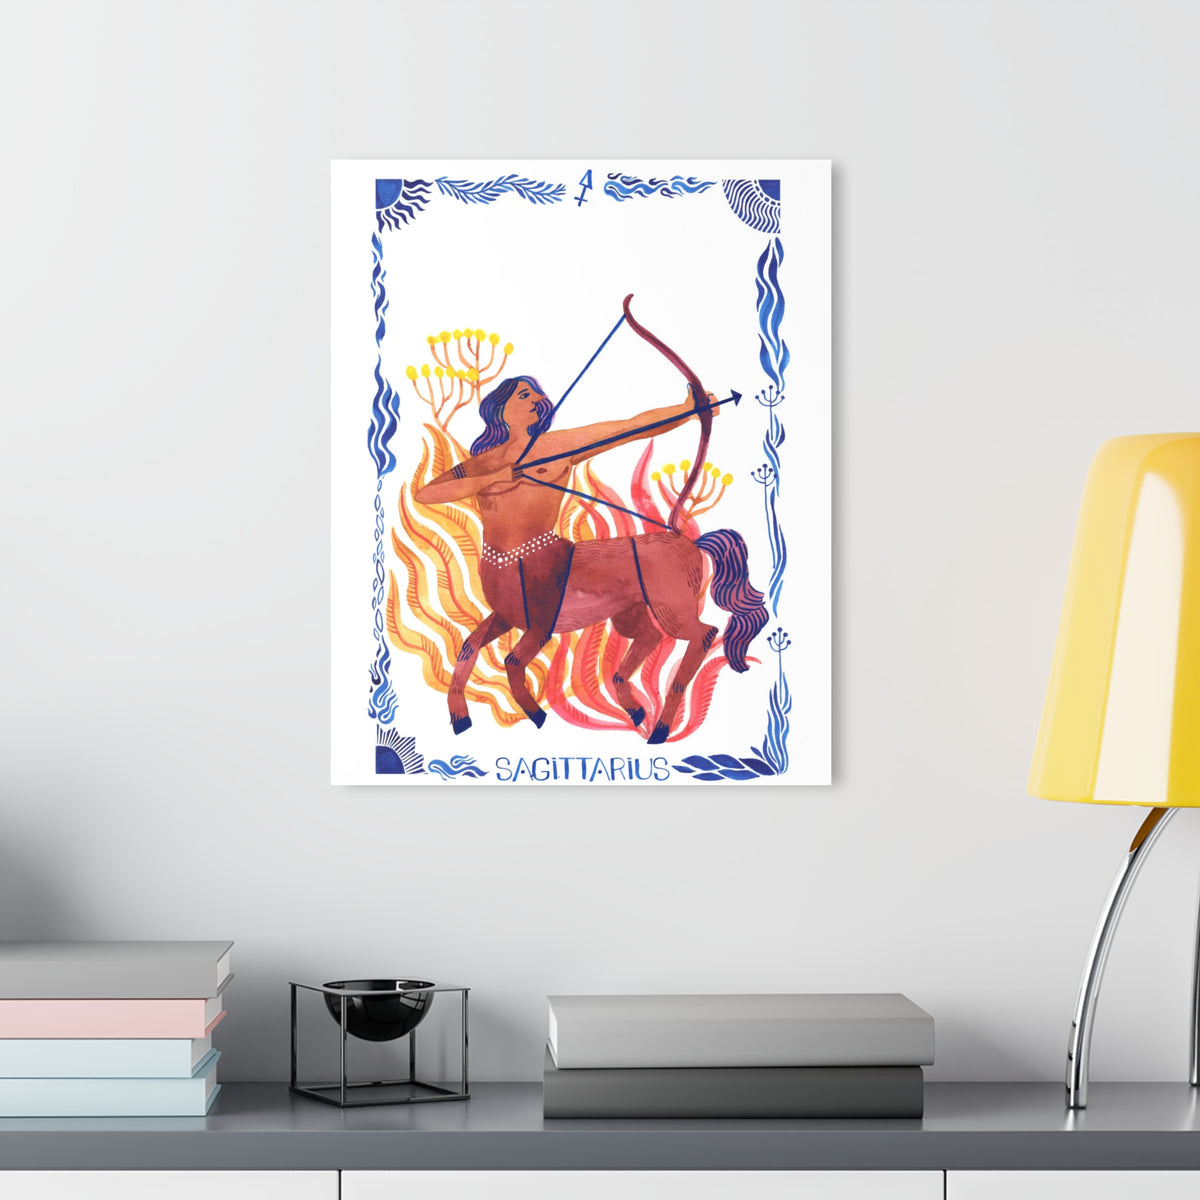 Sagittarius' Spirit: Acrylic Print with French Cleat Hanging